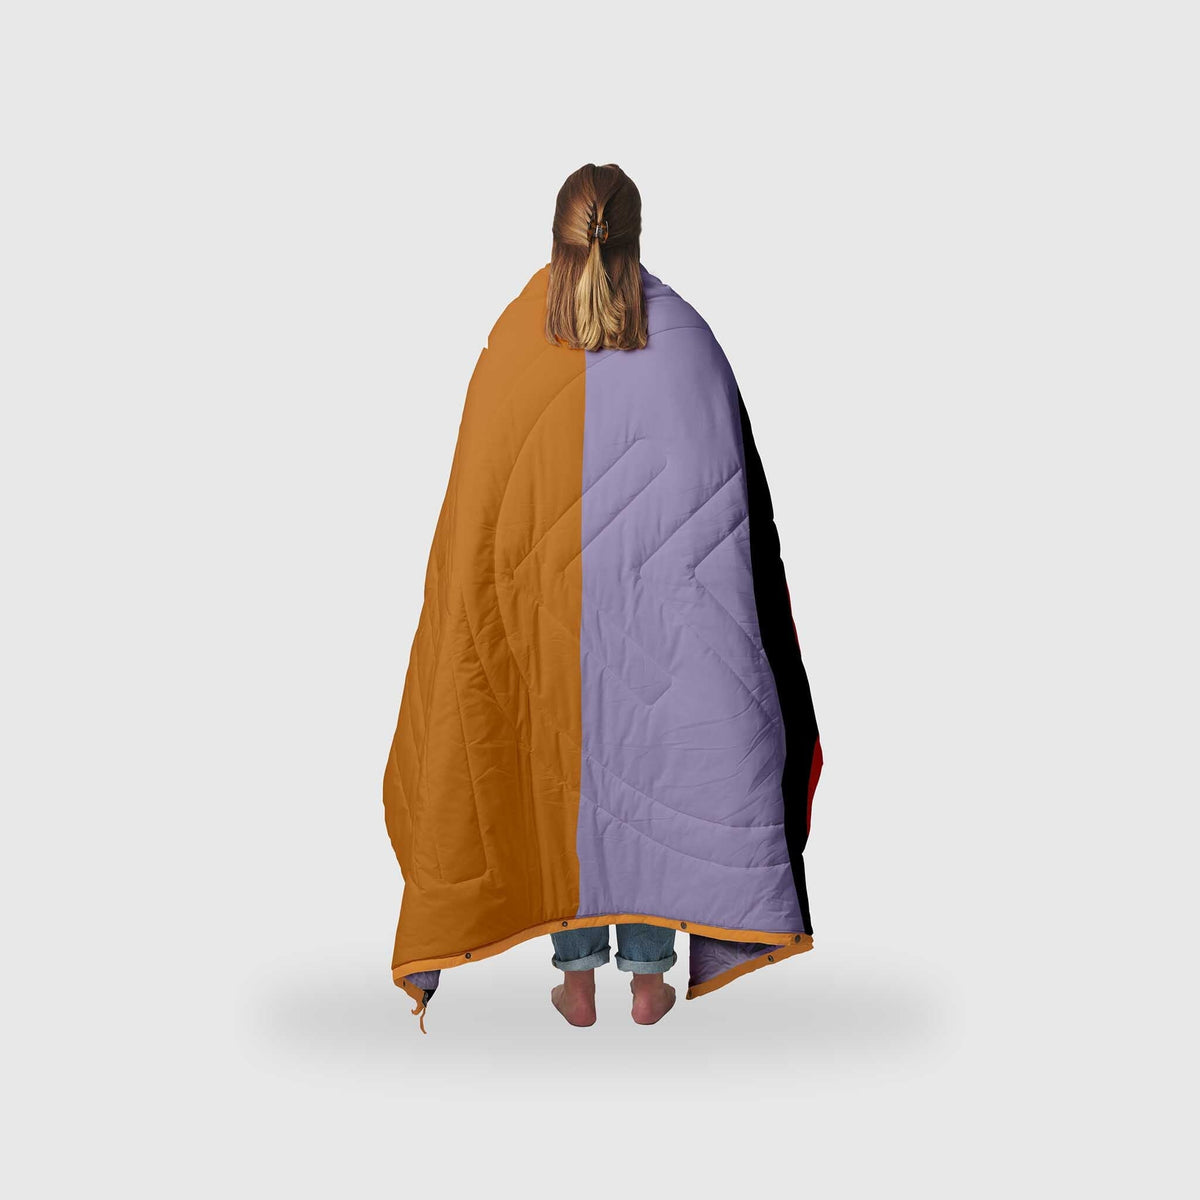 VOITED Recycled Ripstop Outdoor Camping Blanket - Blocks Blankets VOITED 